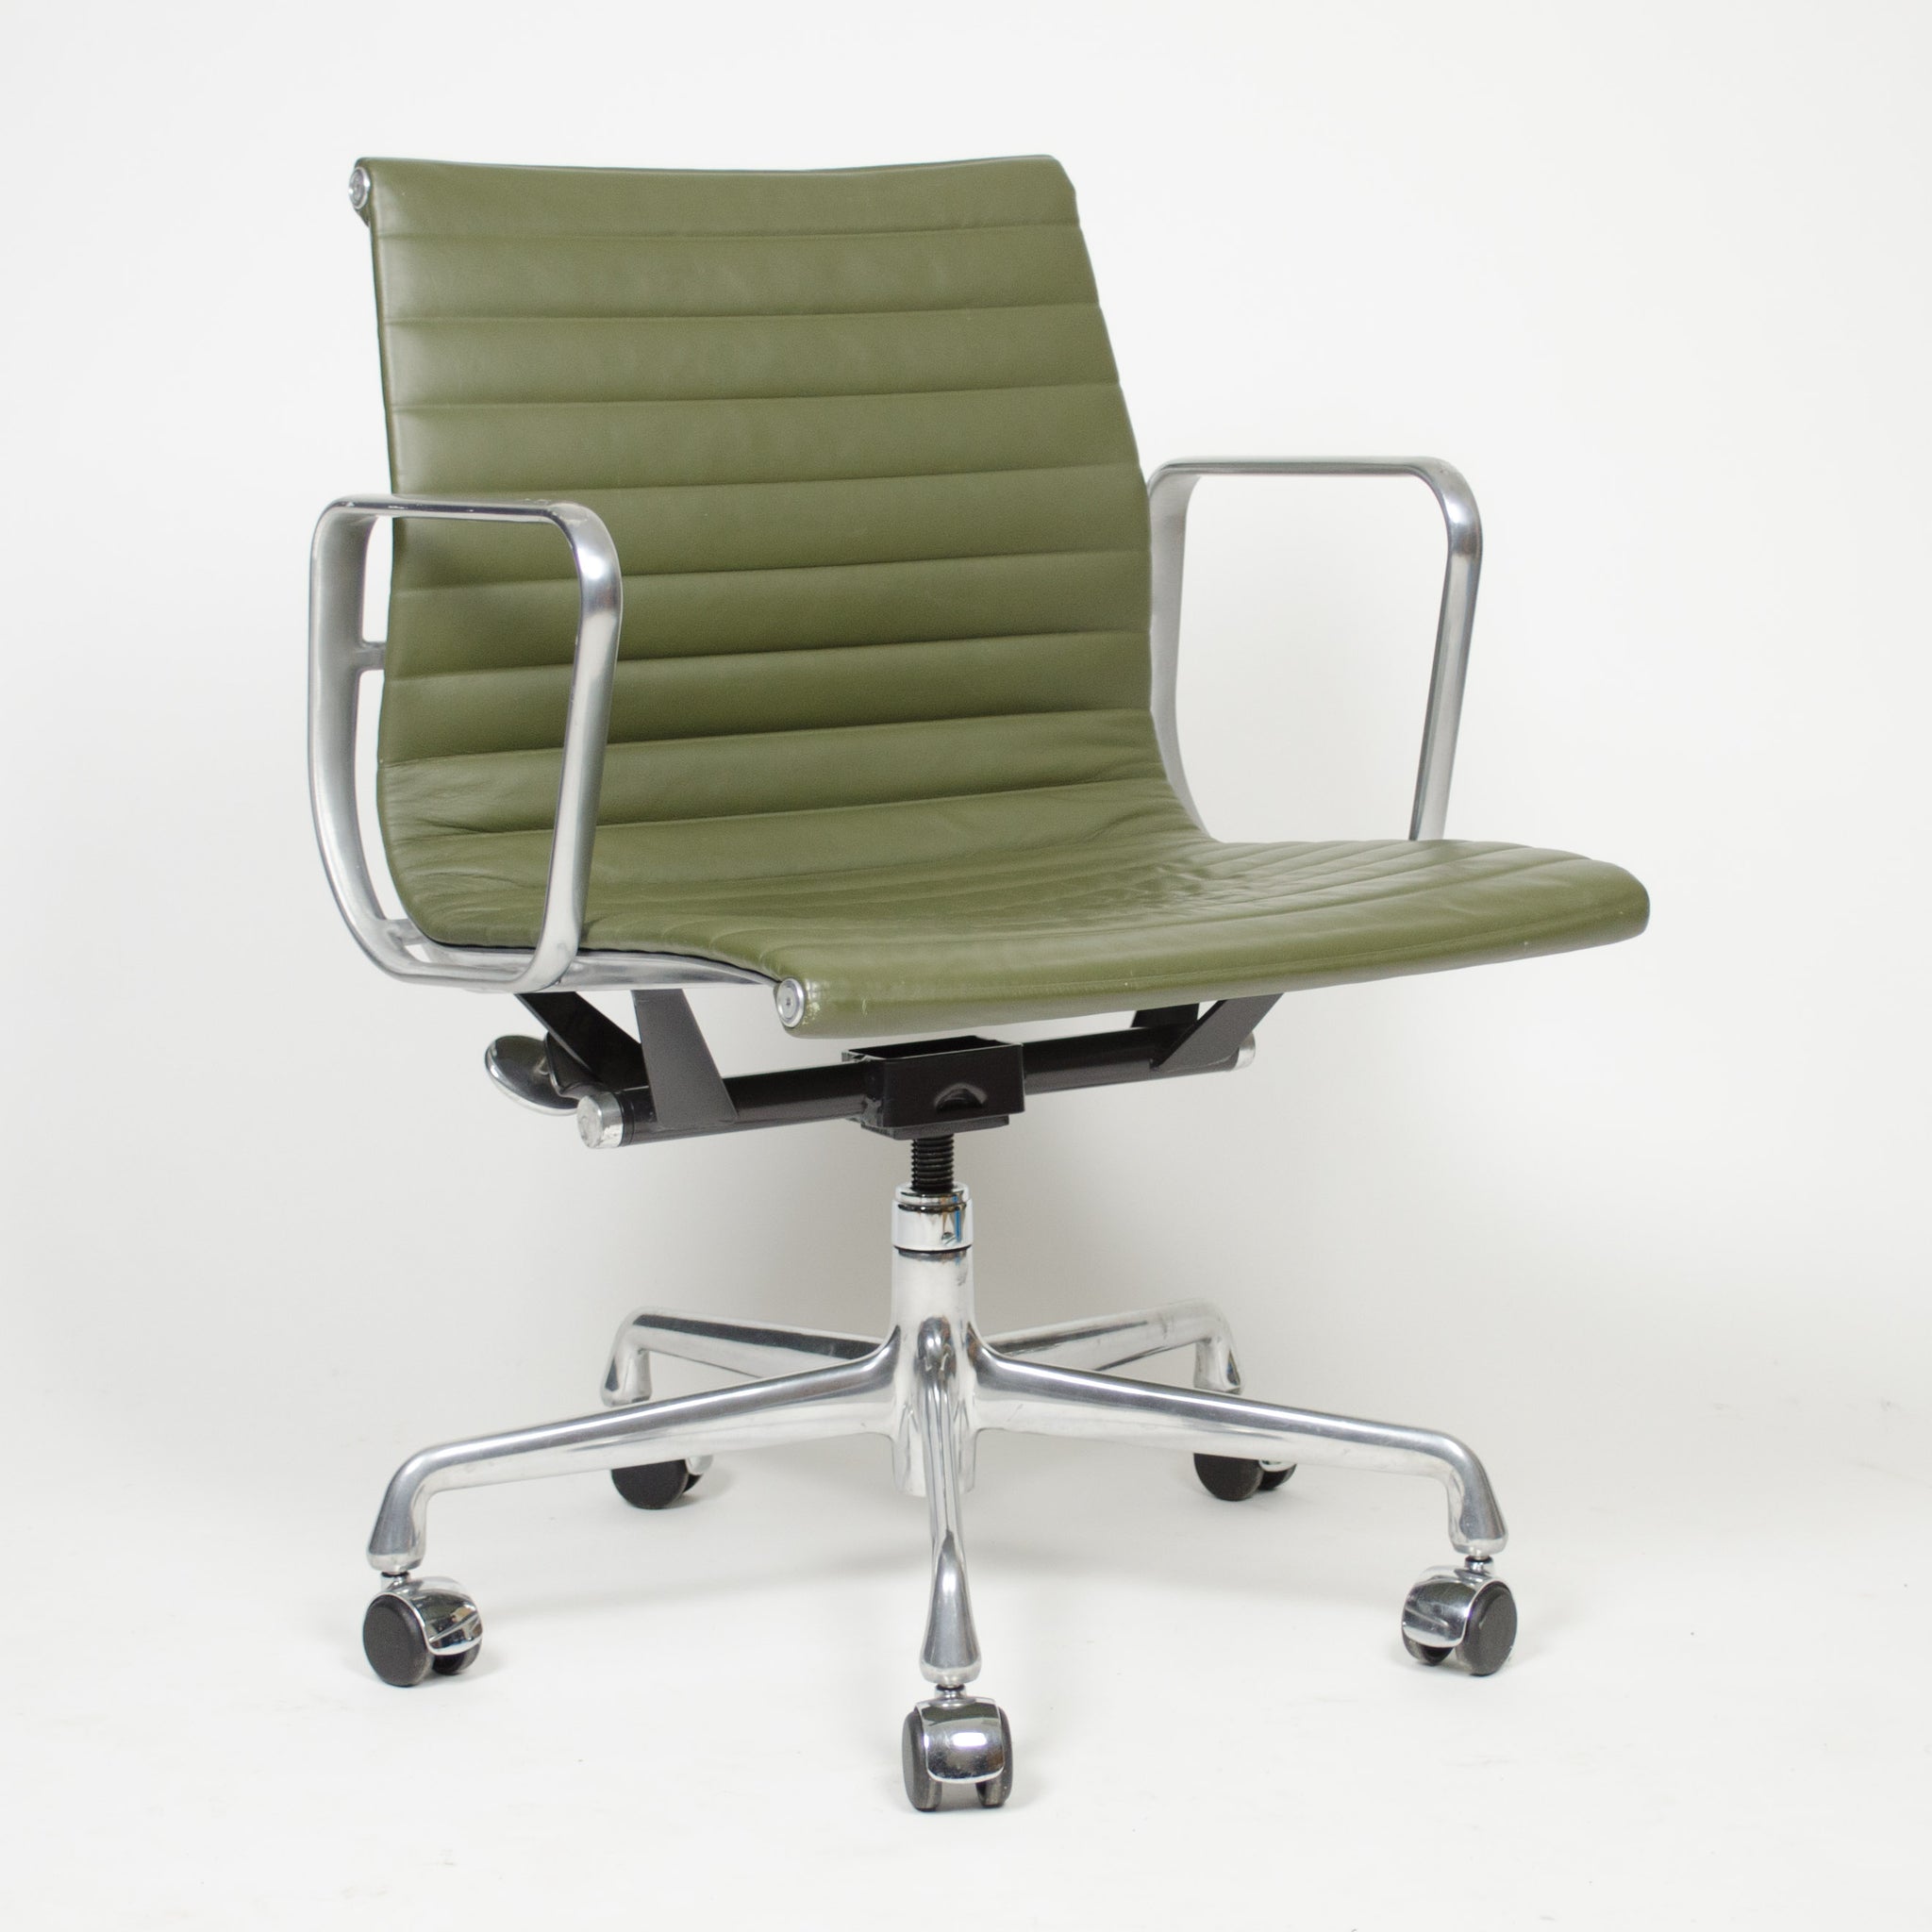 SOLD 2009 Green Leather Eames Herman Miller Low Aluminum Group Executive Desk Chair